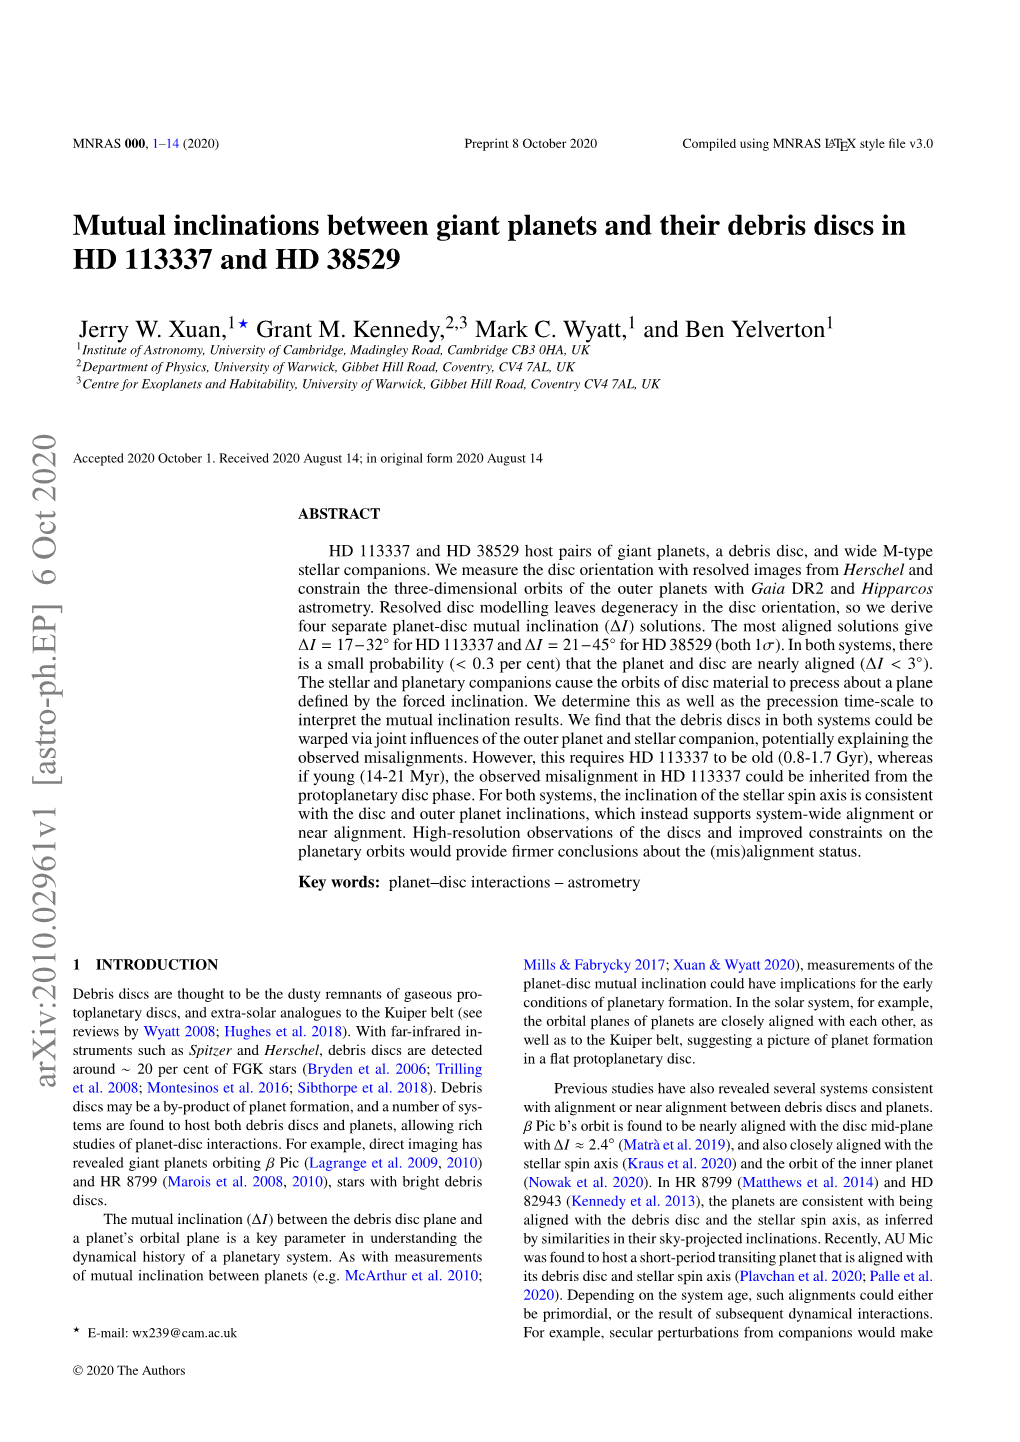 Mutual Inclinations Between Giant Planets and Their Debris Discs in HD 113337 and HD 38529